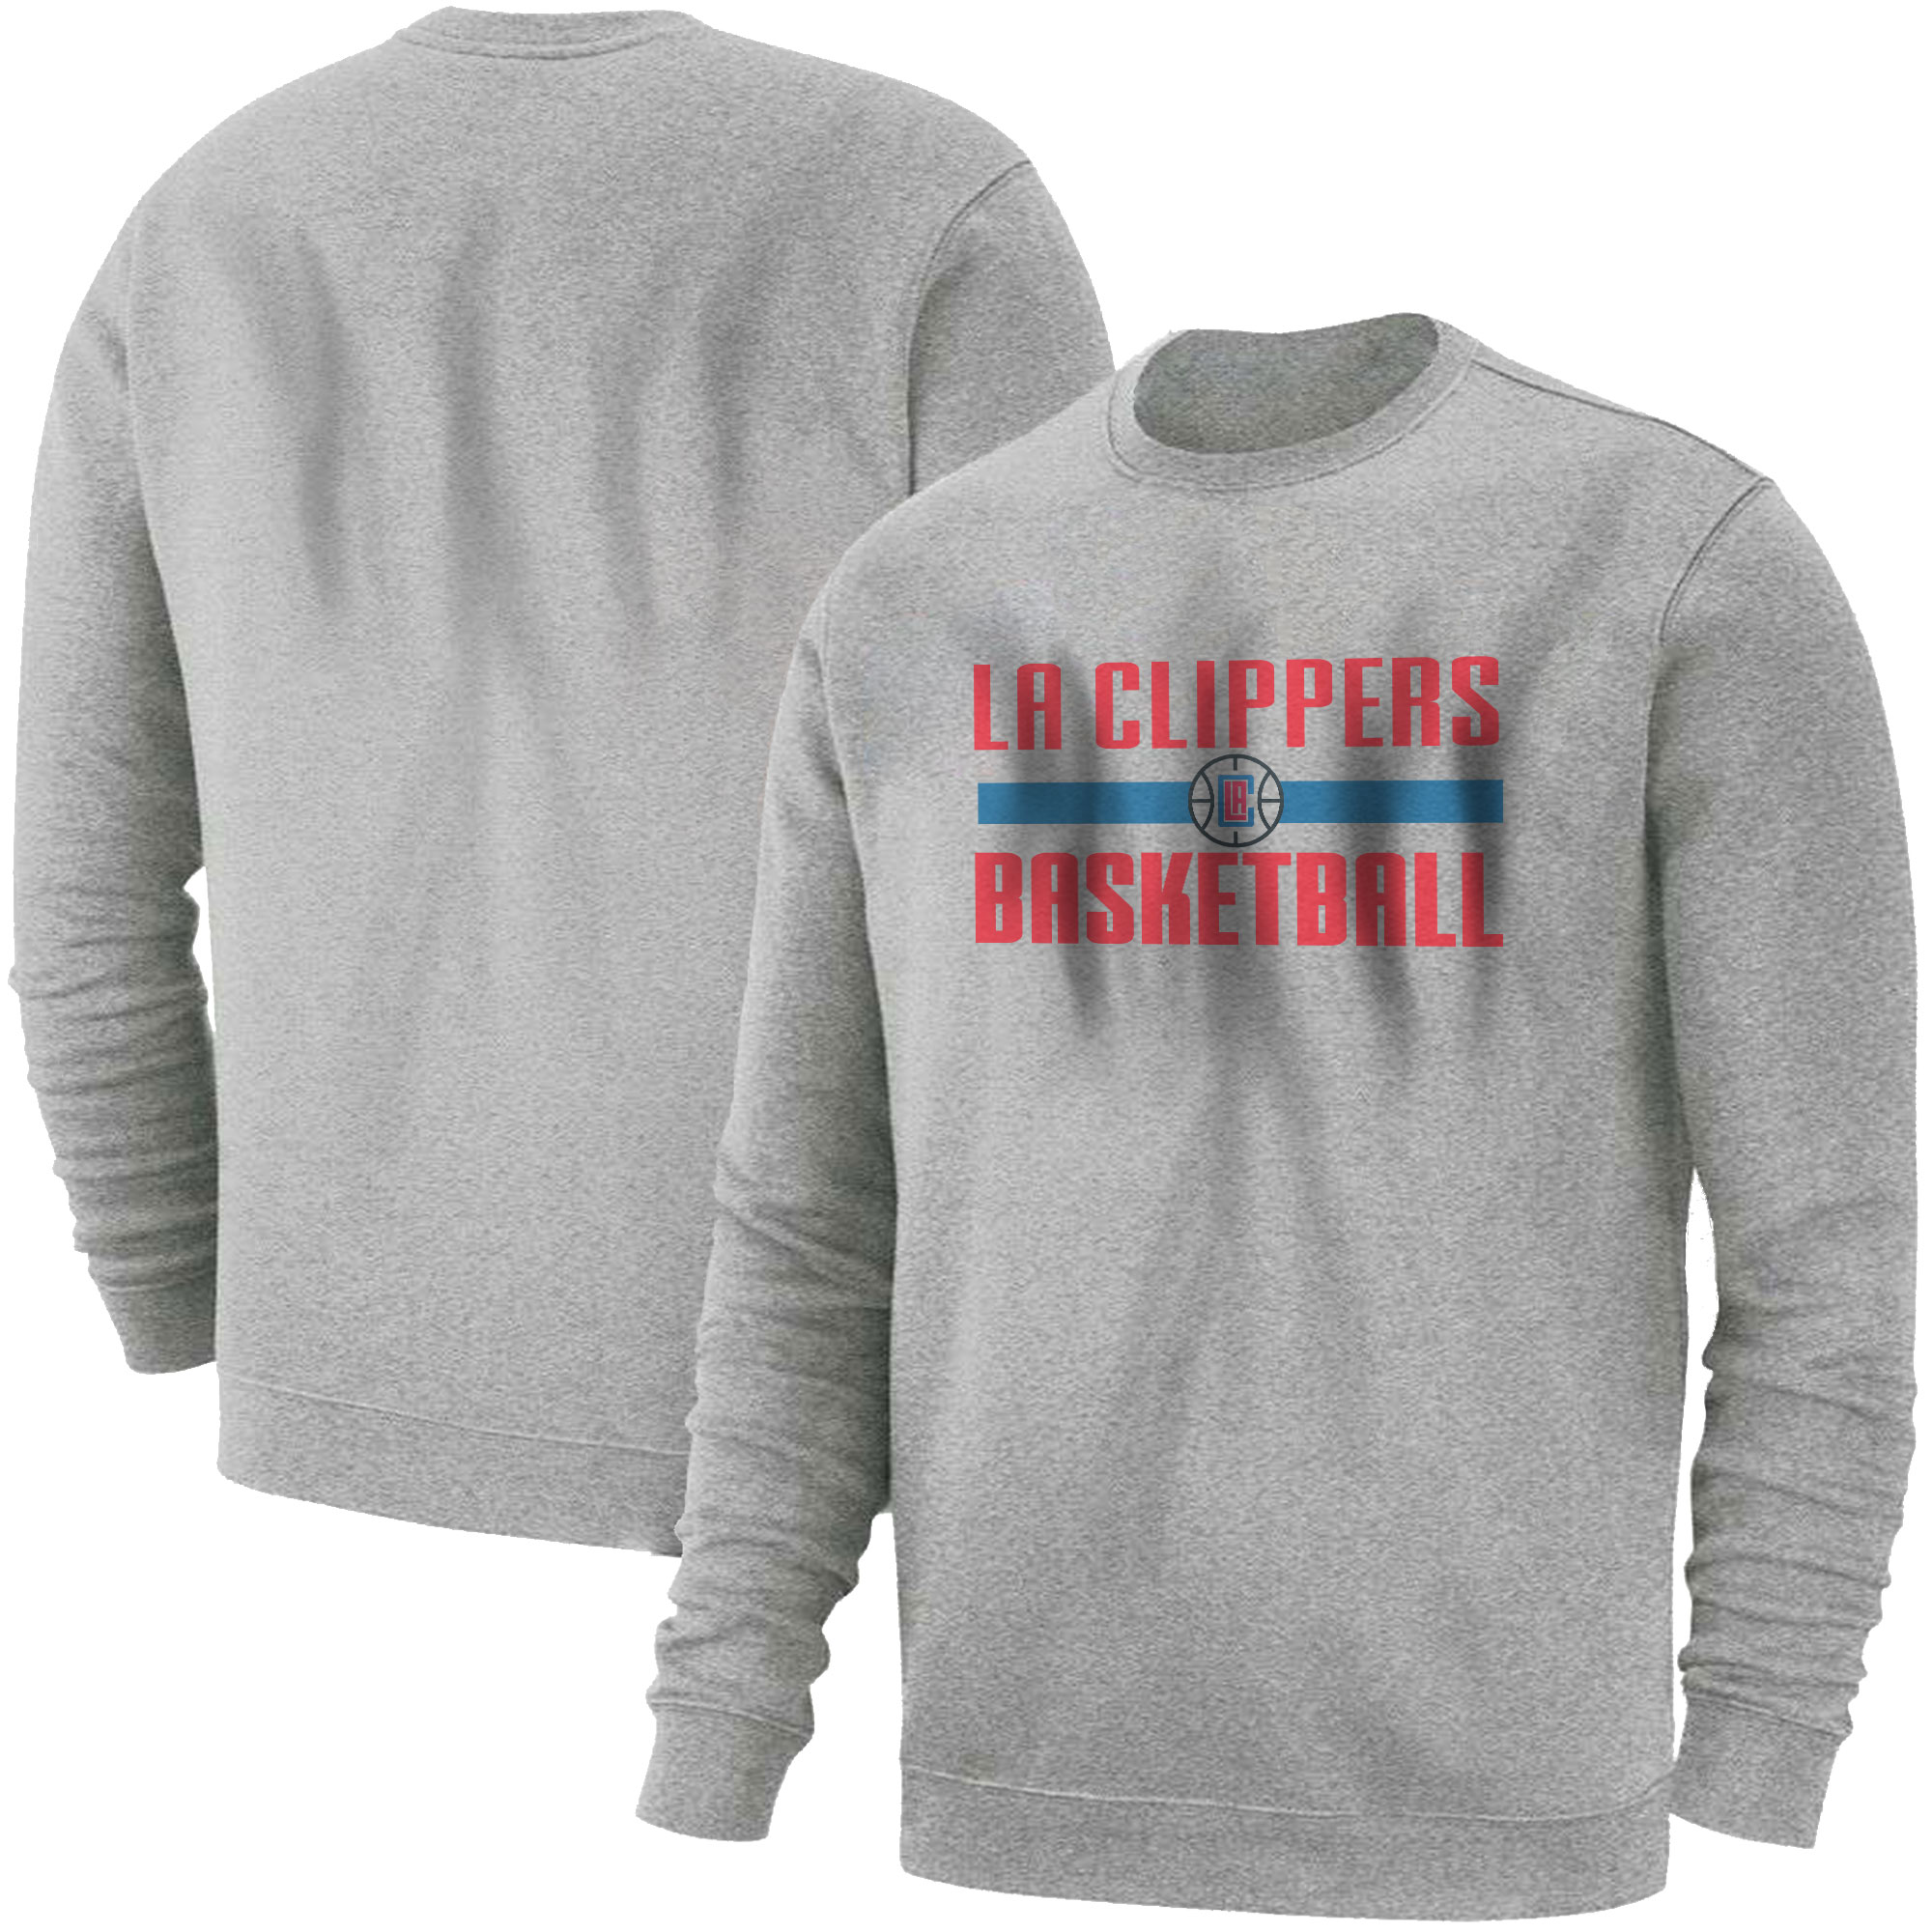 L.A. Clippers Basketball Basic (BSC-GRY-908)